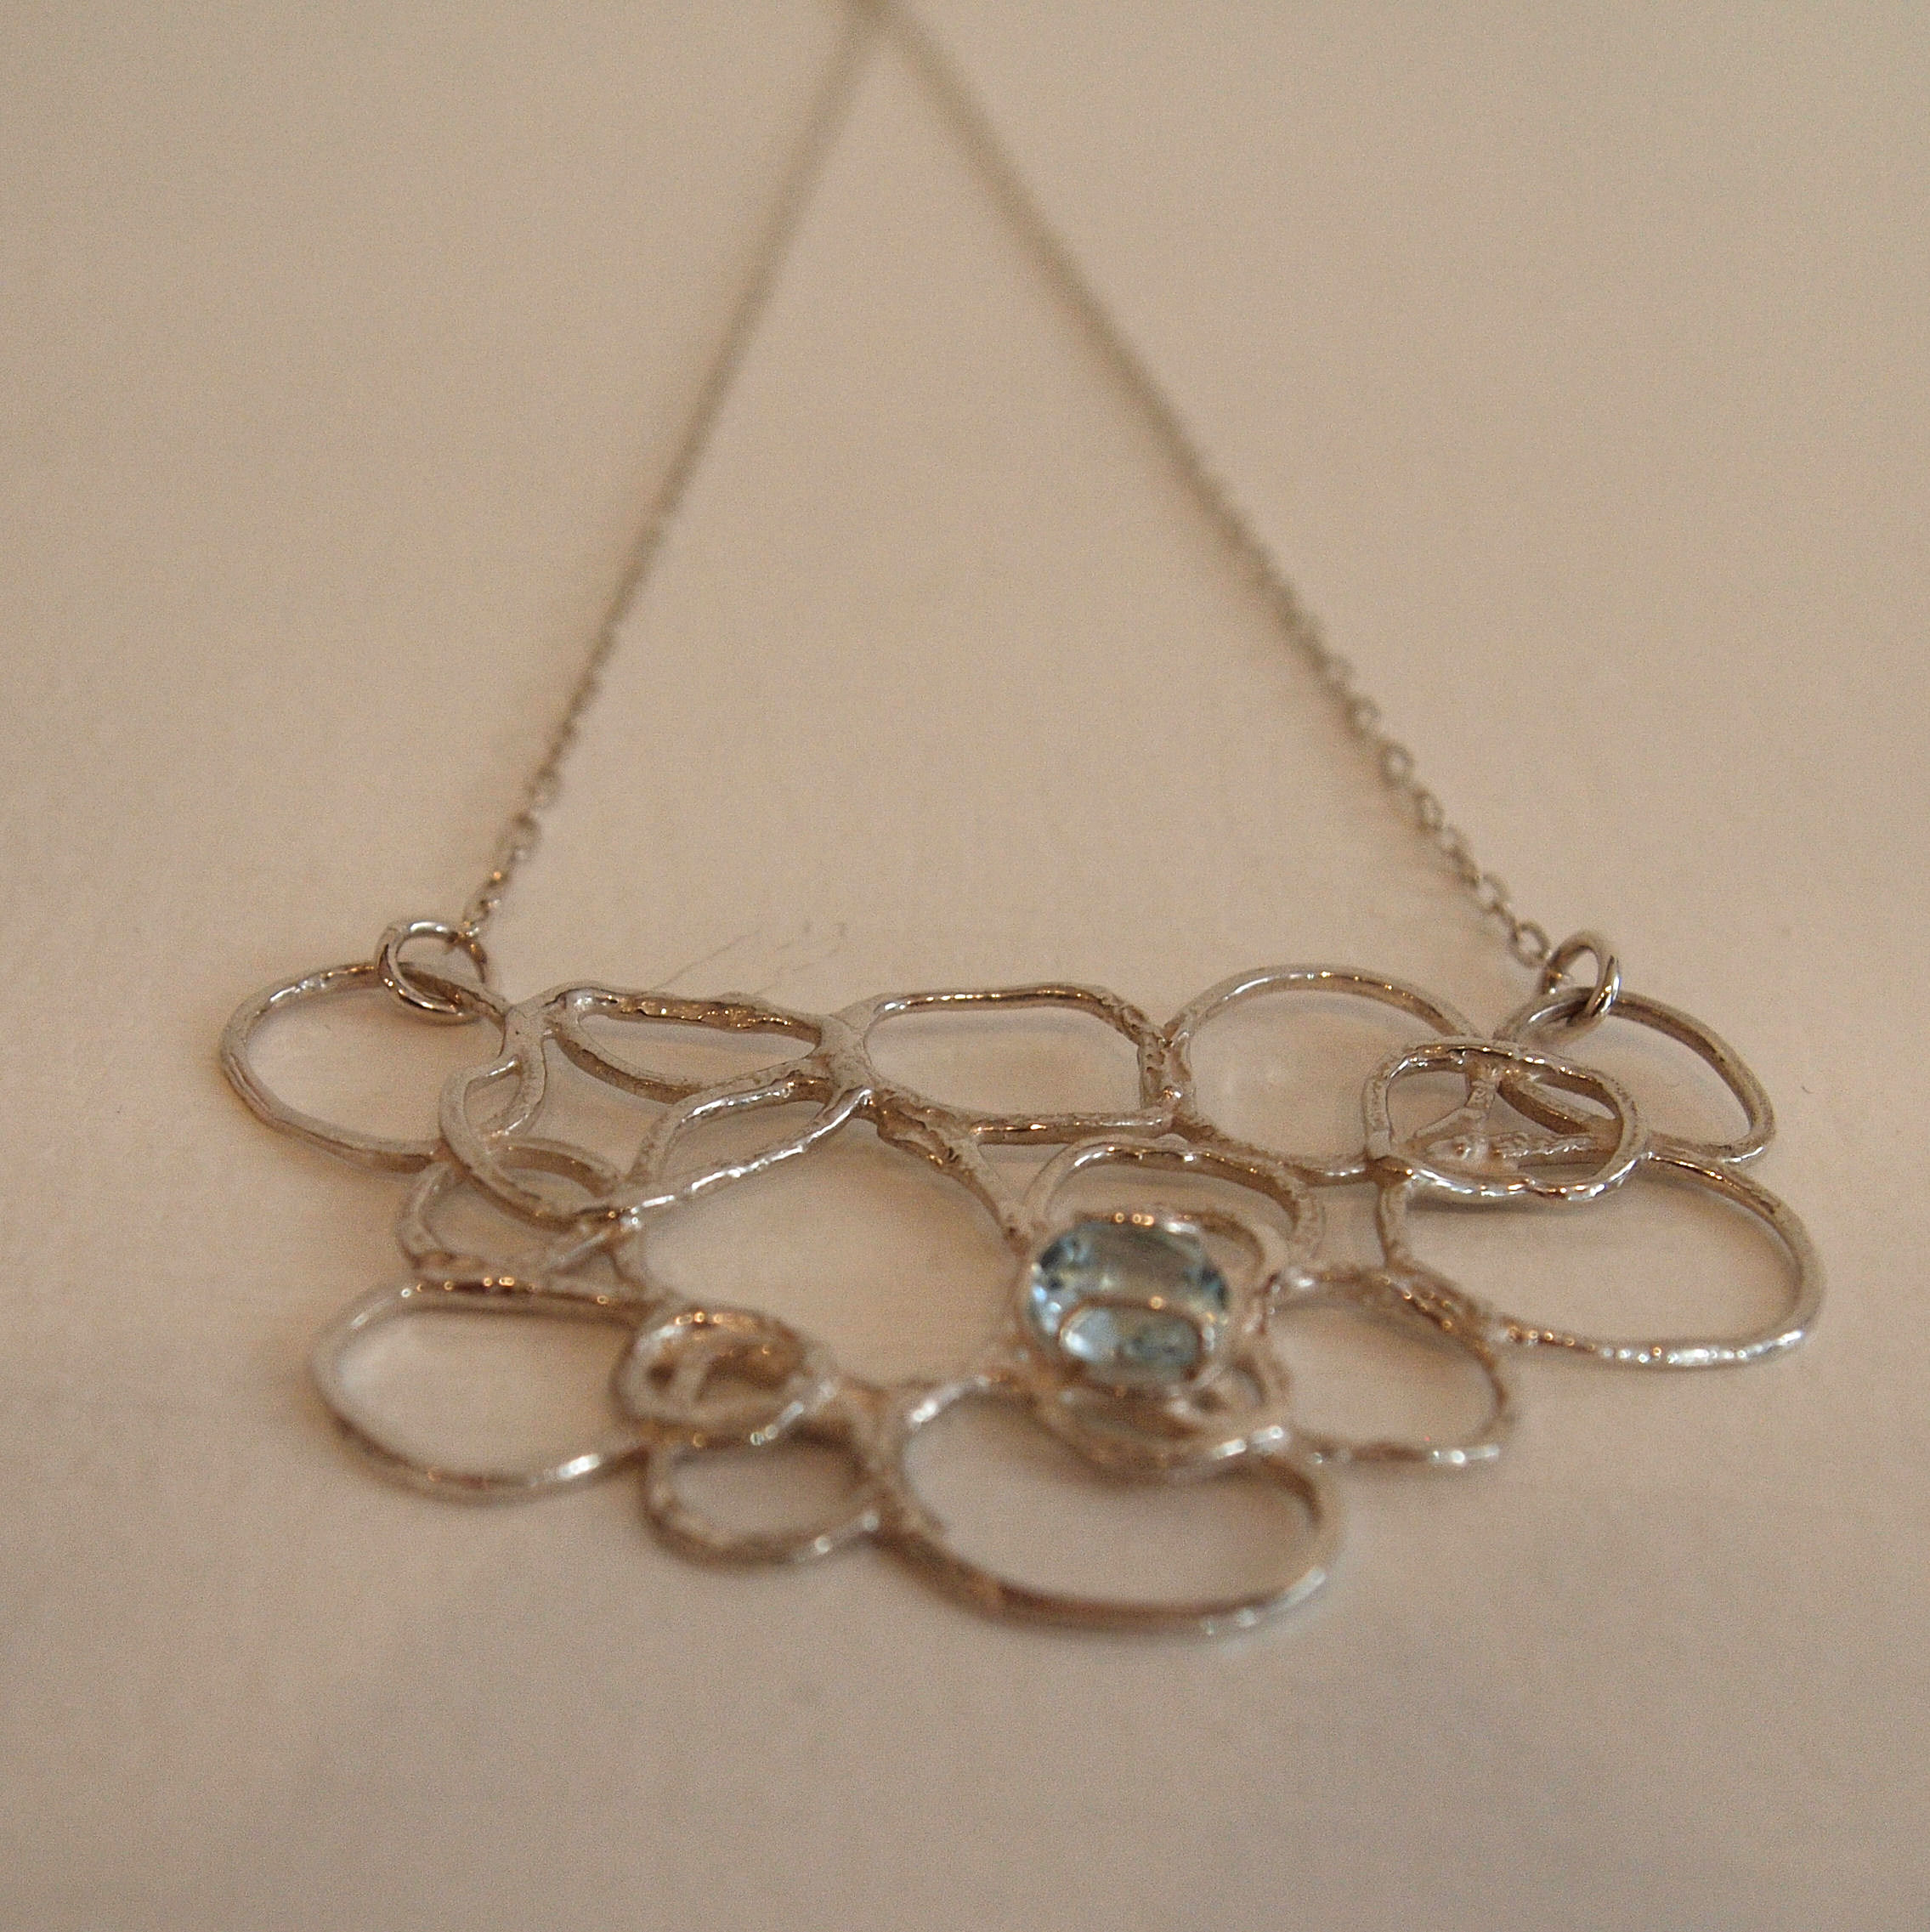 'Silver and 7mm Round Sky Blue Topaz Exposed Necklace' by artist Scarlett Erskine